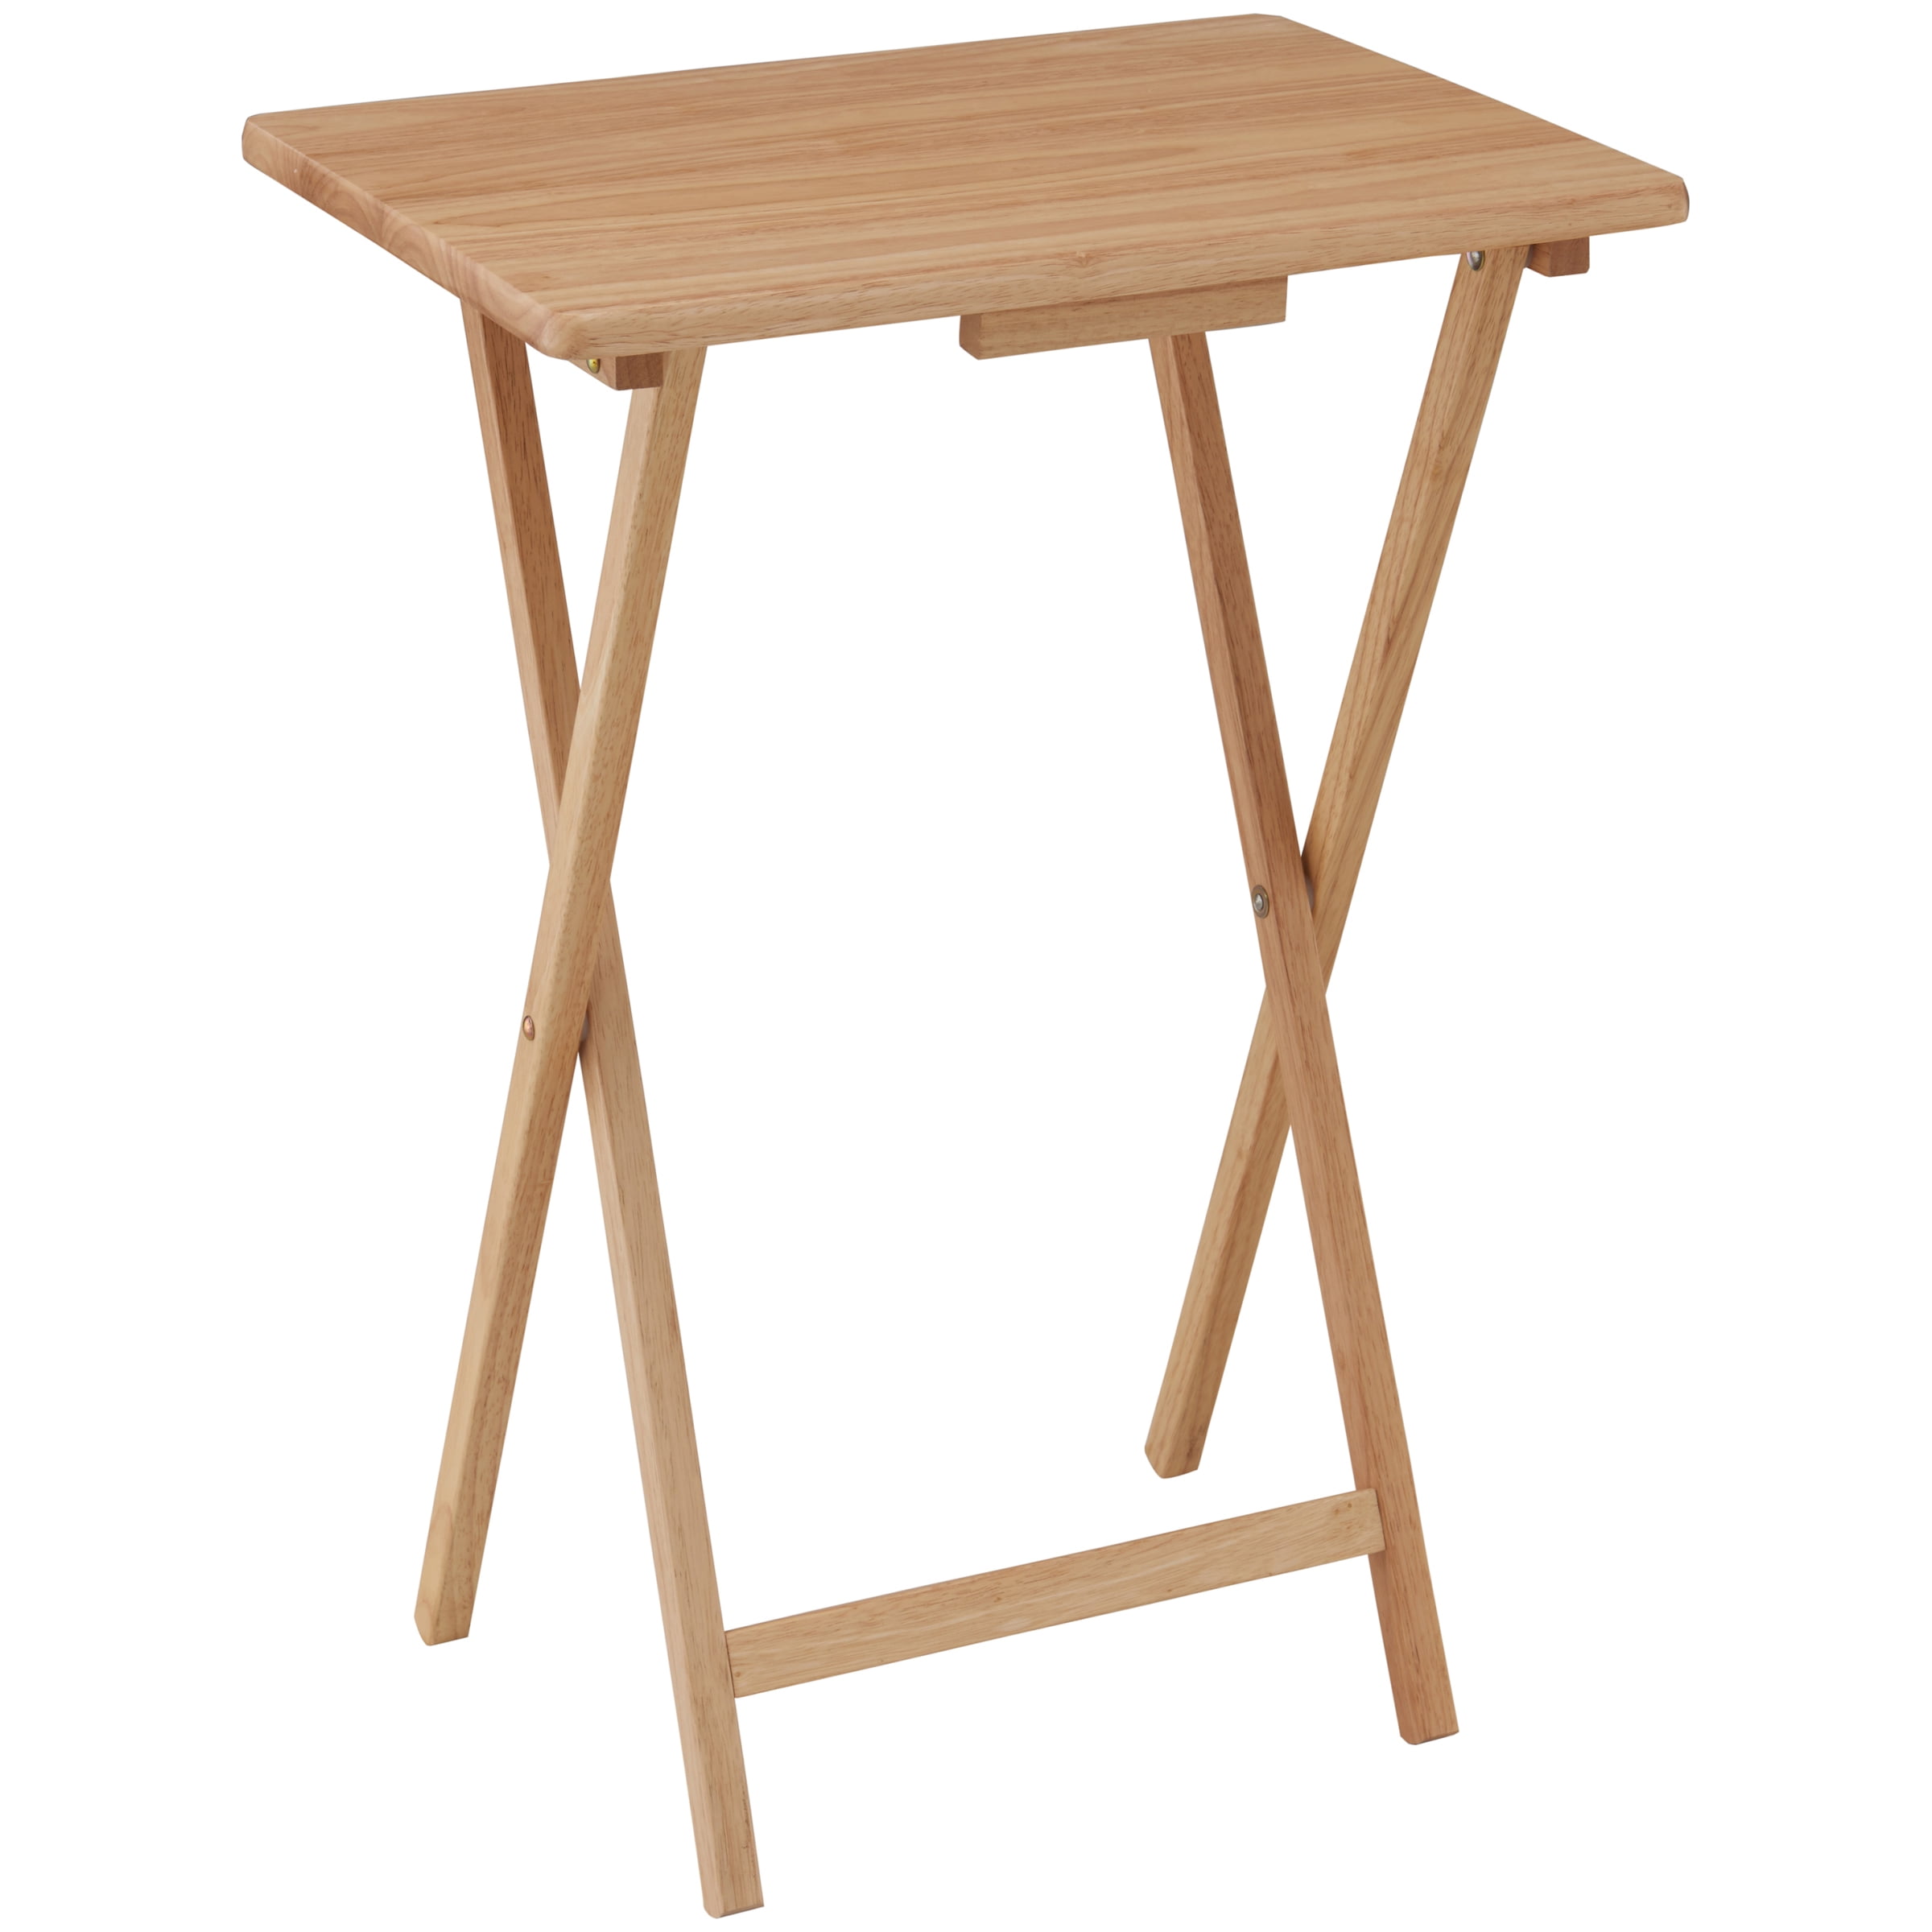 Mainstays 19 Folding Tray Table, Wooden Folding Snack Tables